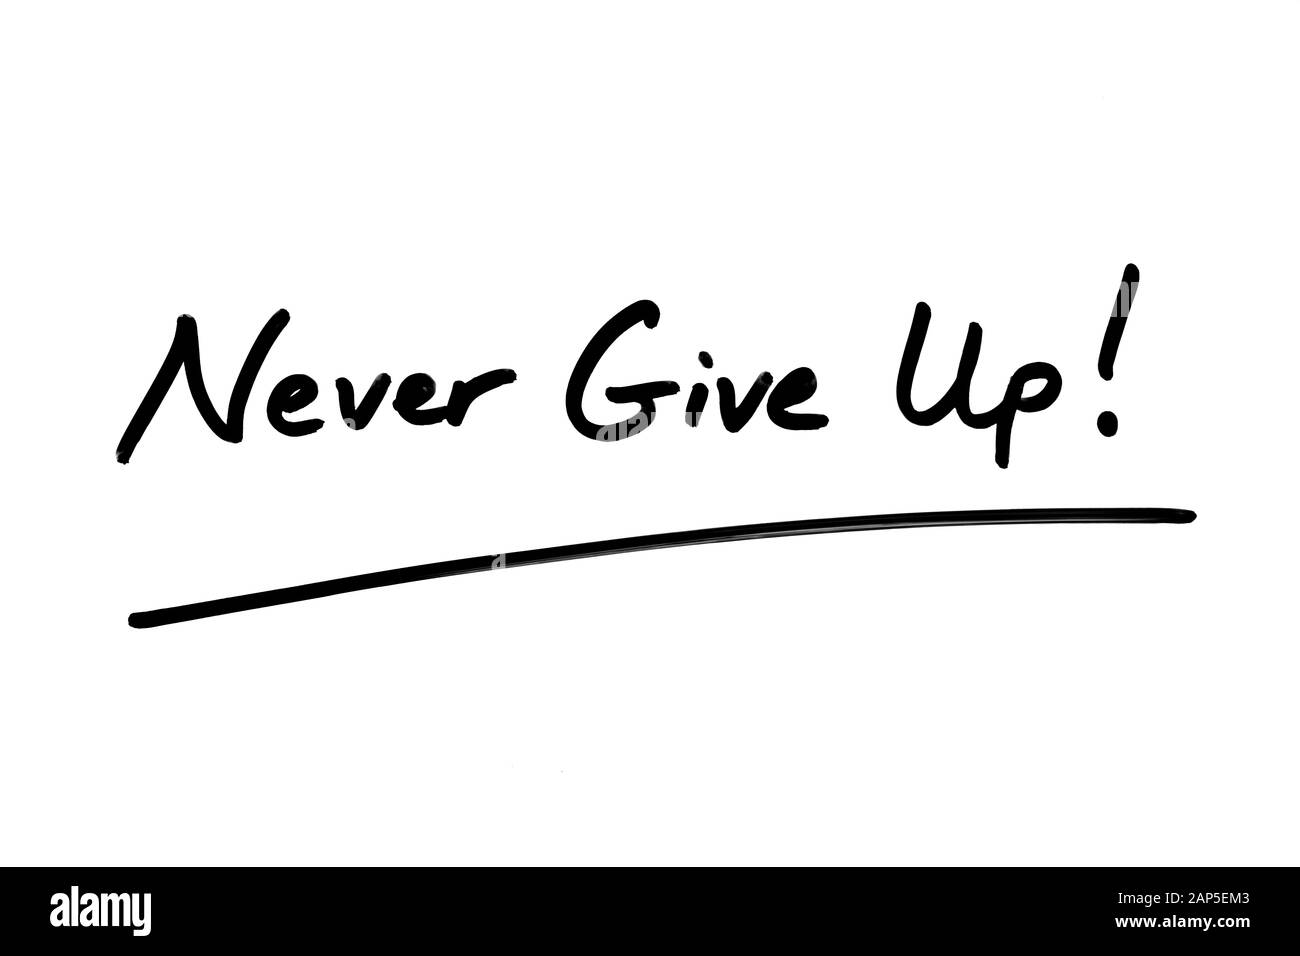 Never Give Up! handwritten on a white background Stock Photo - Alamy